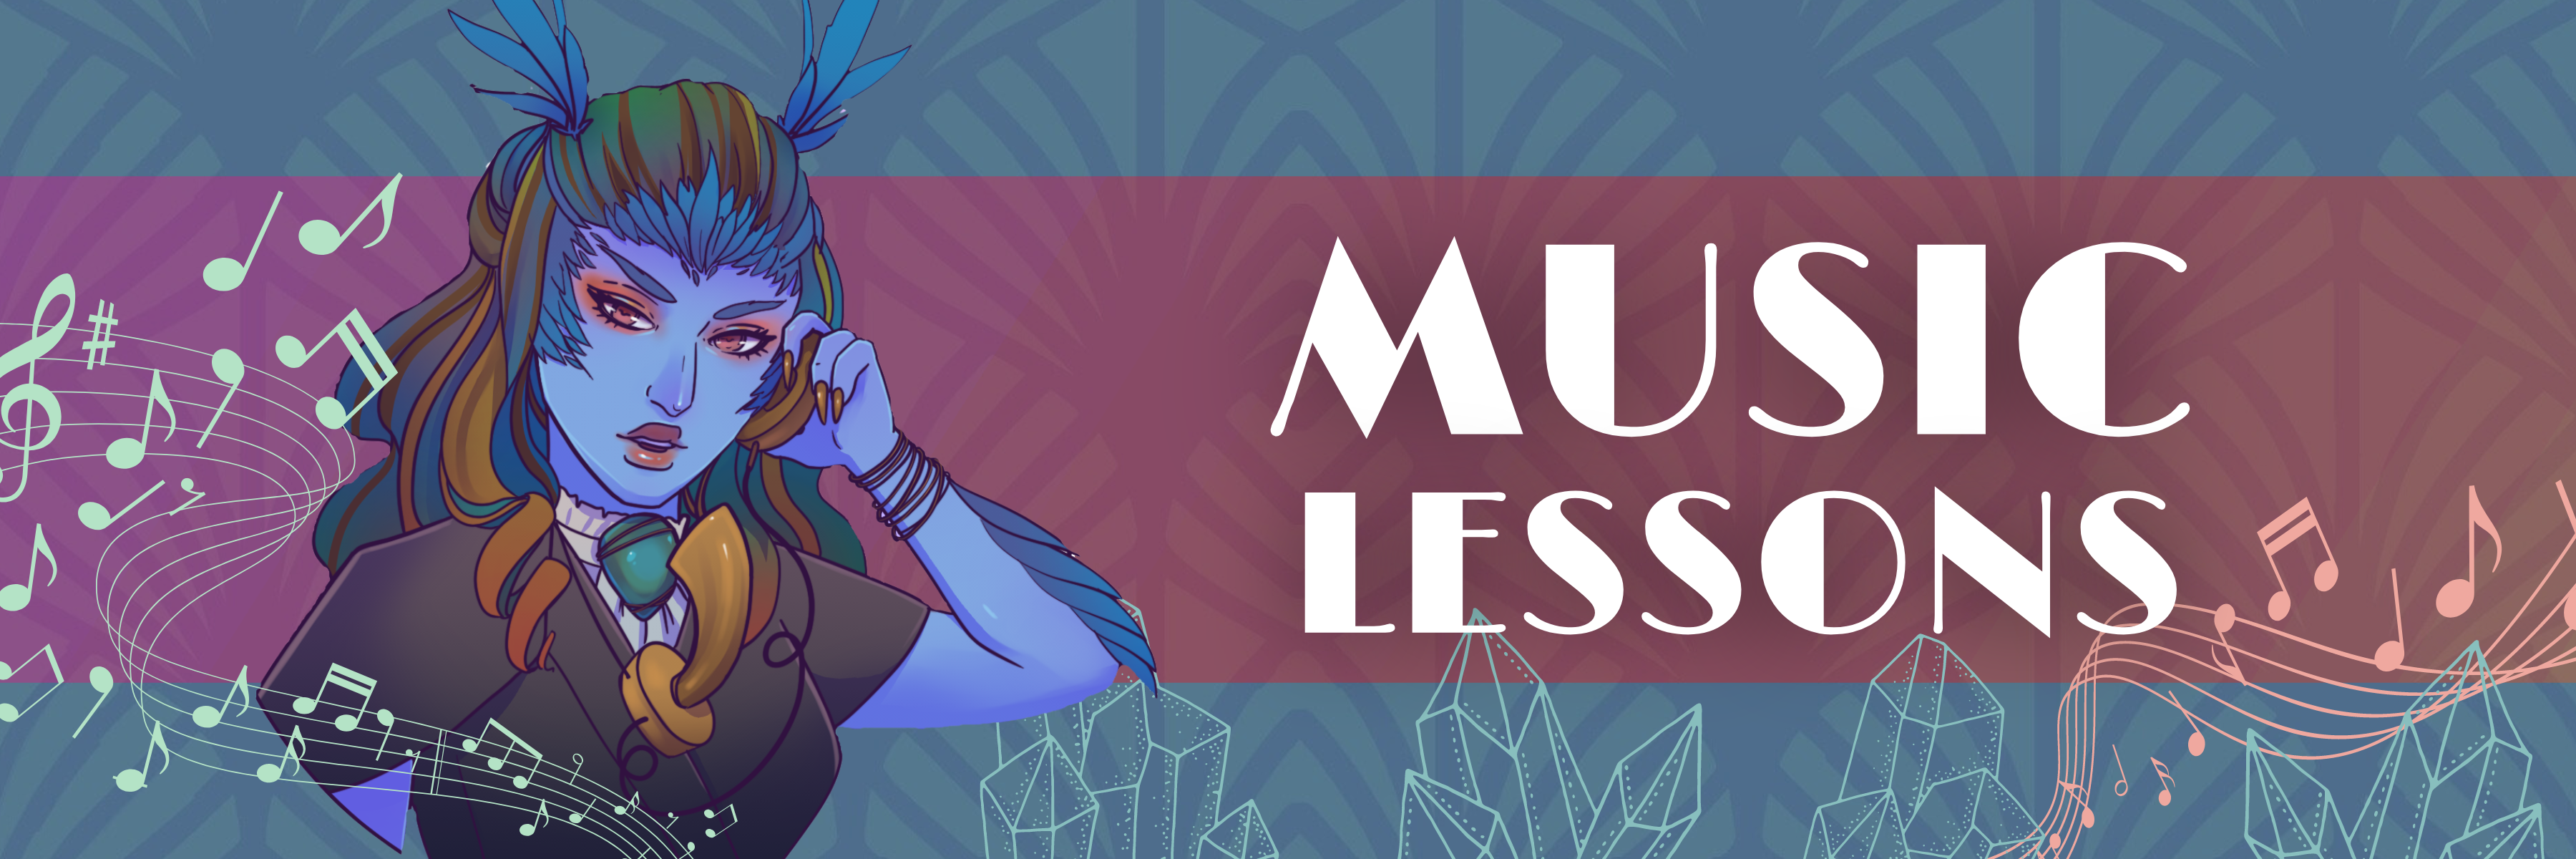 Assets_Canva_Banners_MusicLessons_Header.png